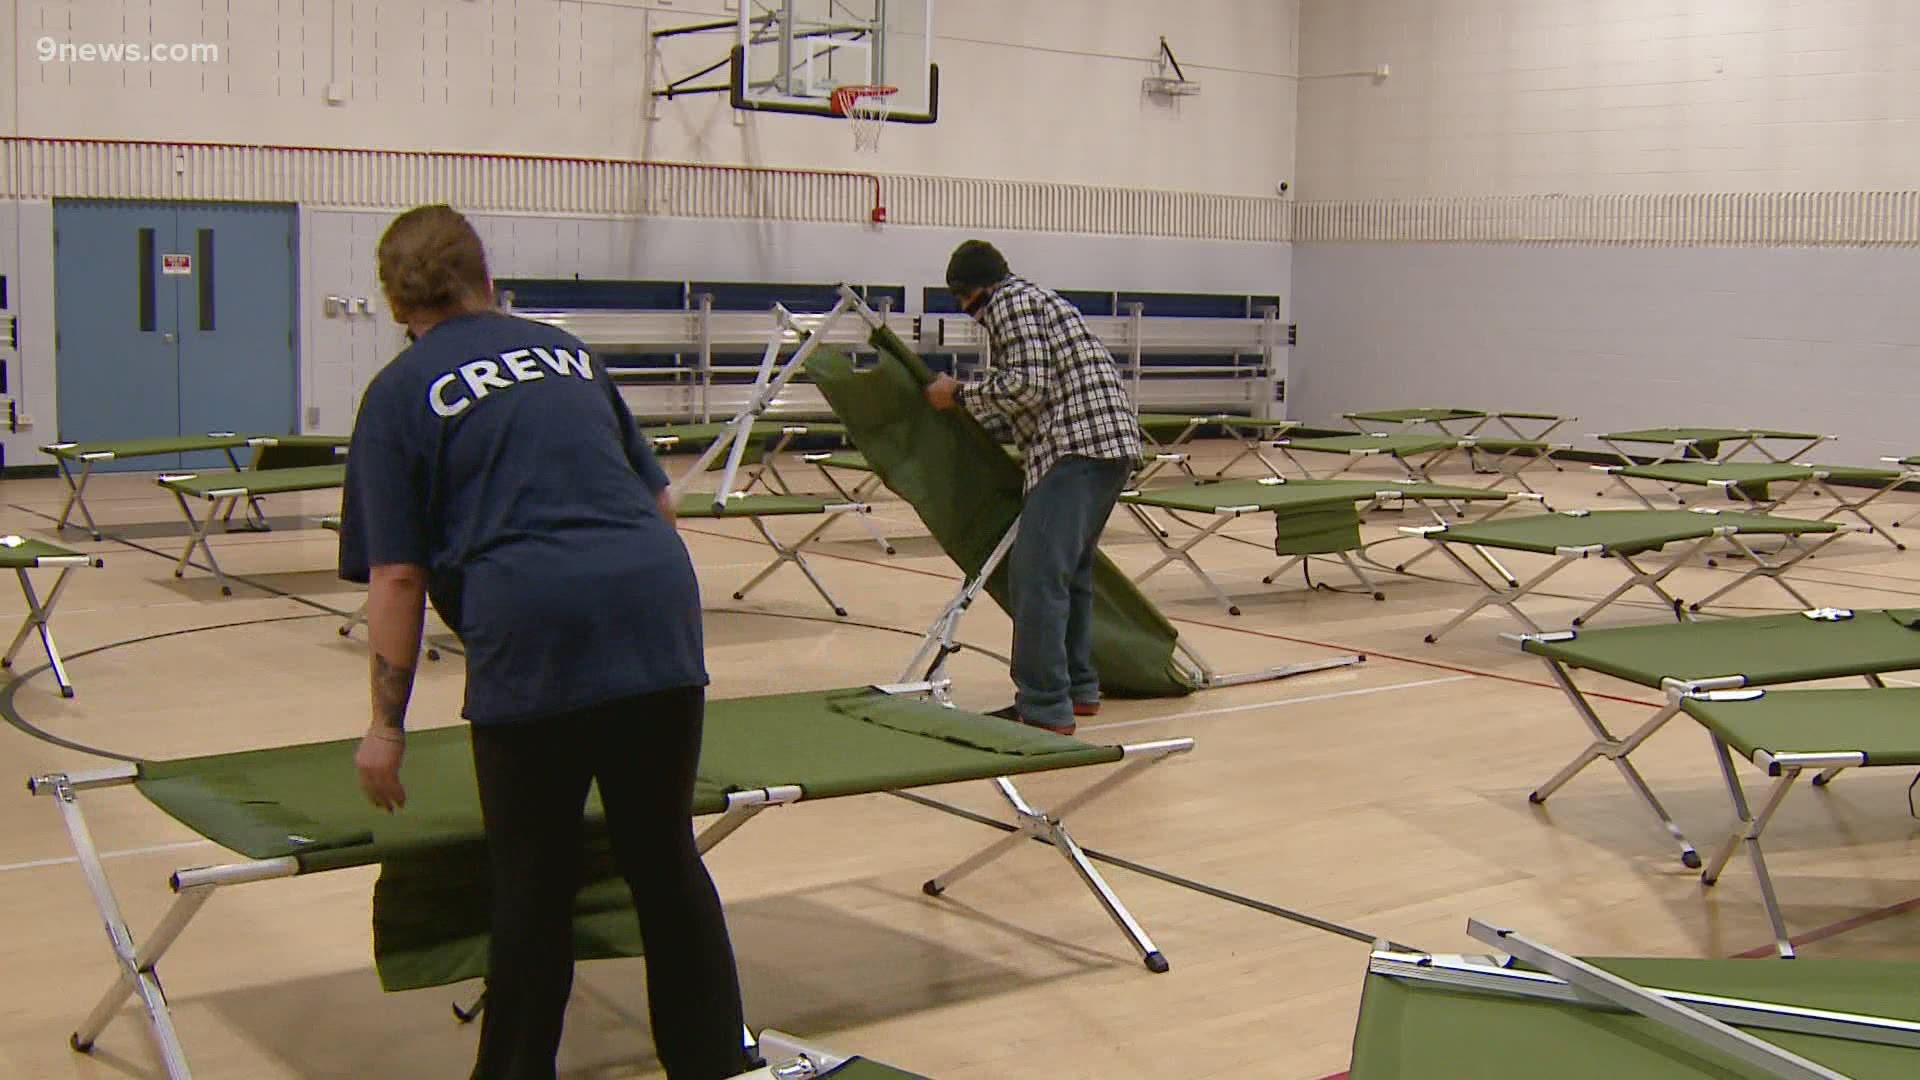 Volunteers have been working alongside paid staff to make sure places like Denver's st Charles Rec center ready.